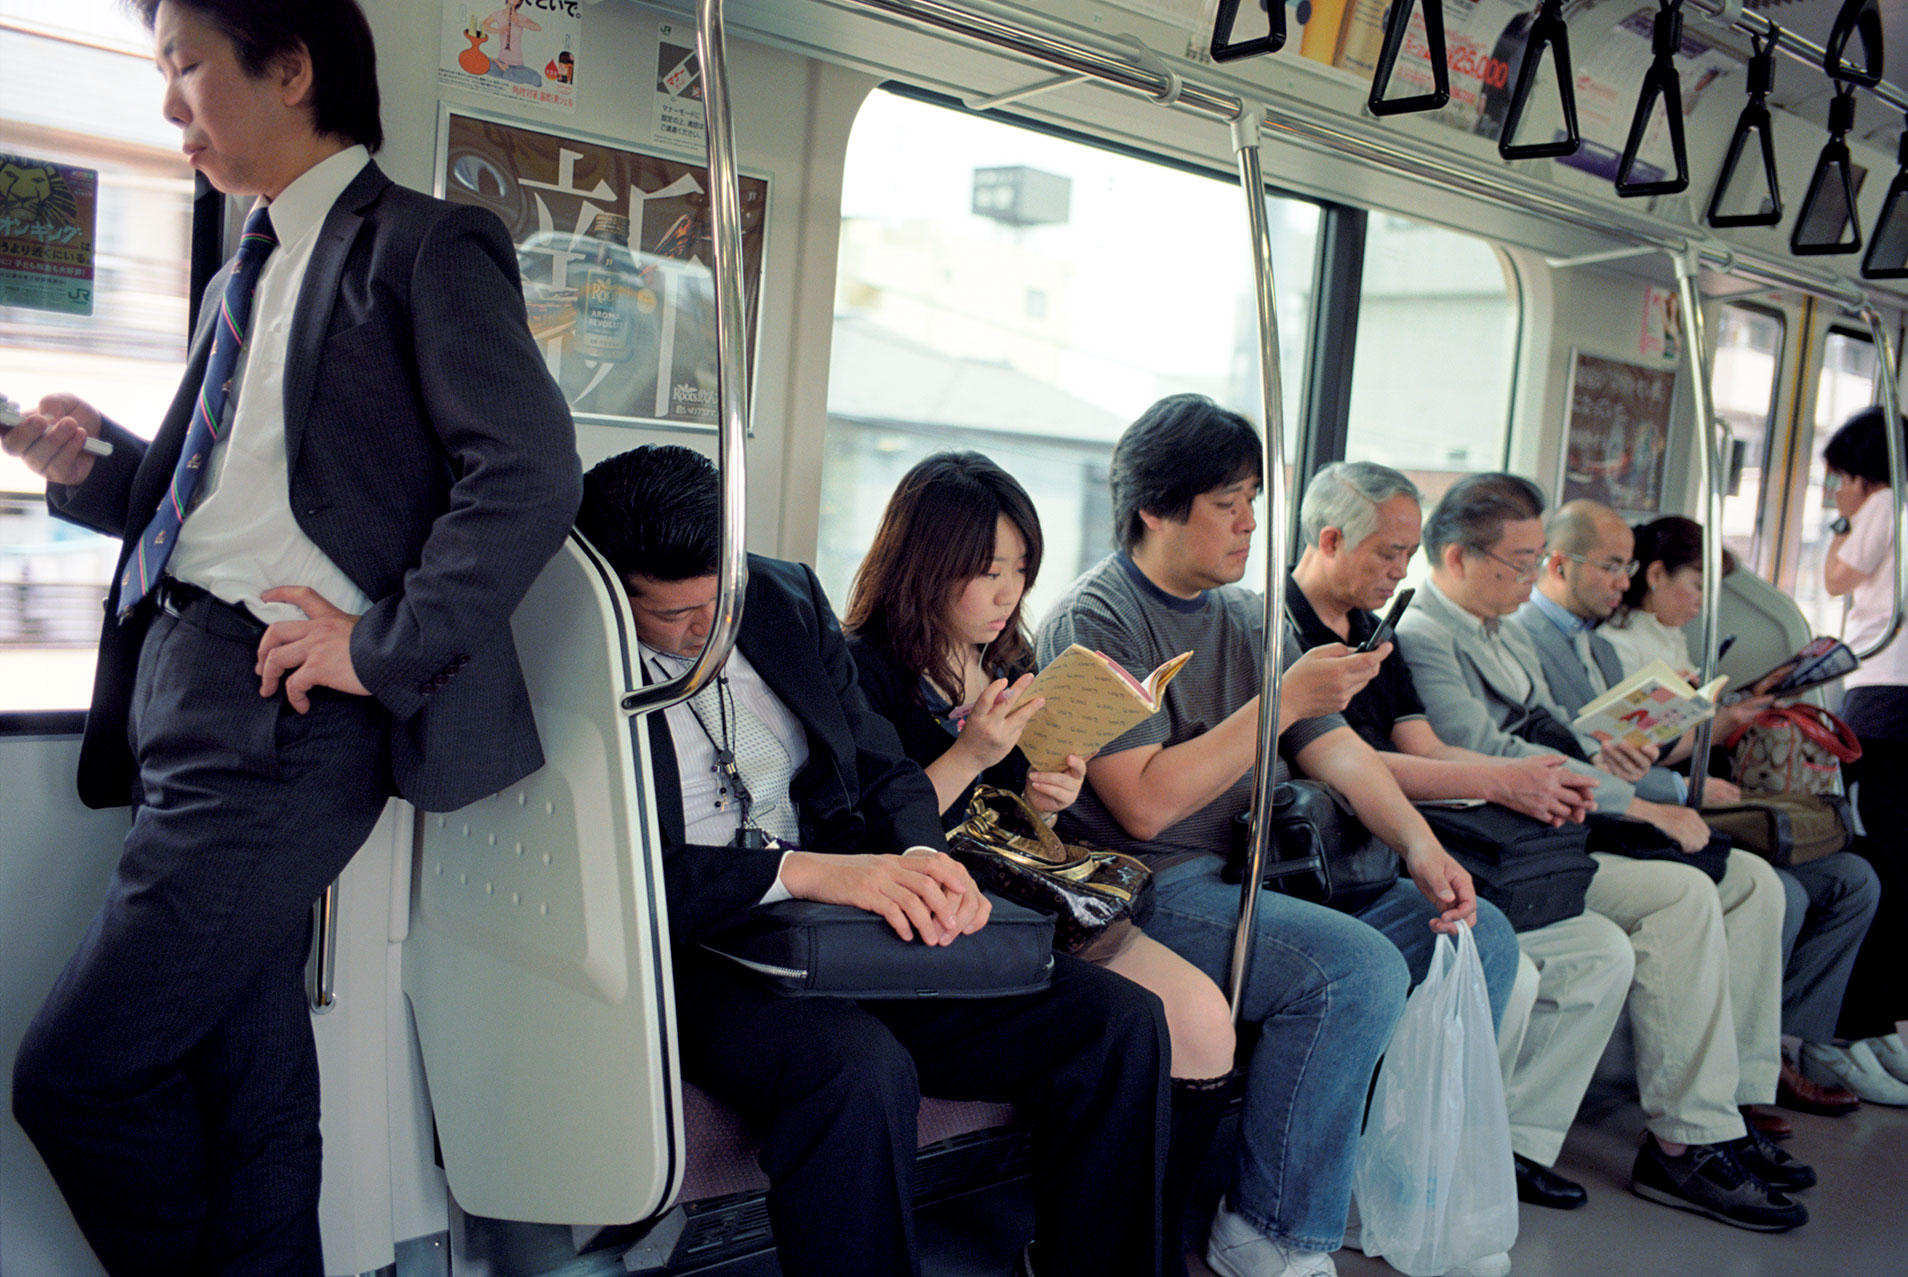 Commuters relaxing on the Chuo Line train to Tachikawa from Tokyo in 2009.